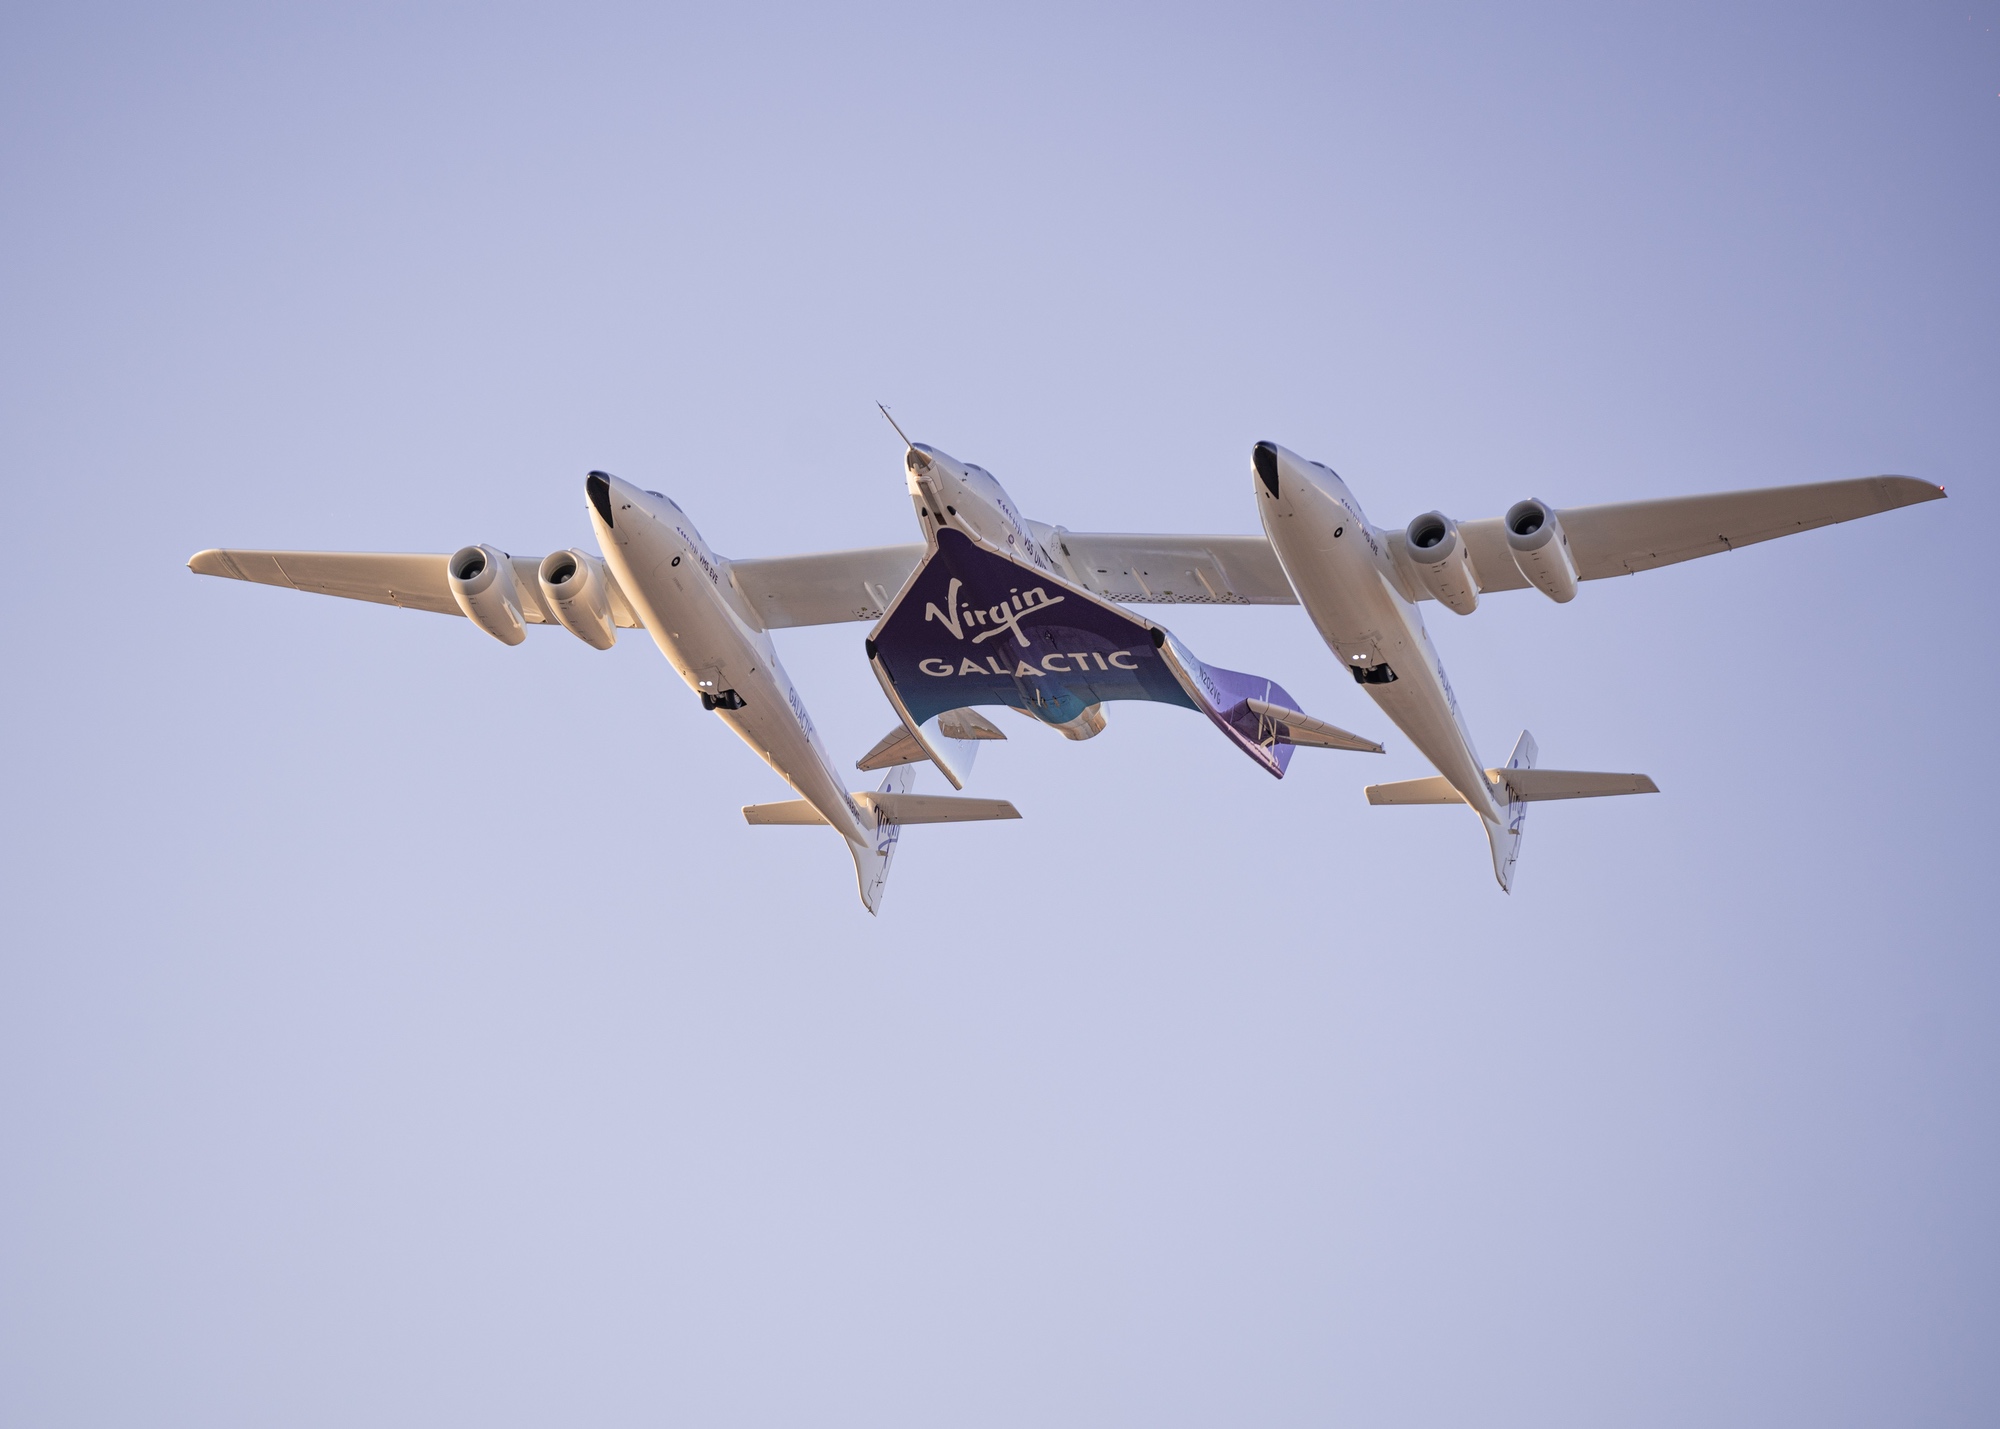 4) “Breaking: Virgin Galactic Launches In-depth Inquiry into Mystery of Dropped Pin on Suborbital Flight